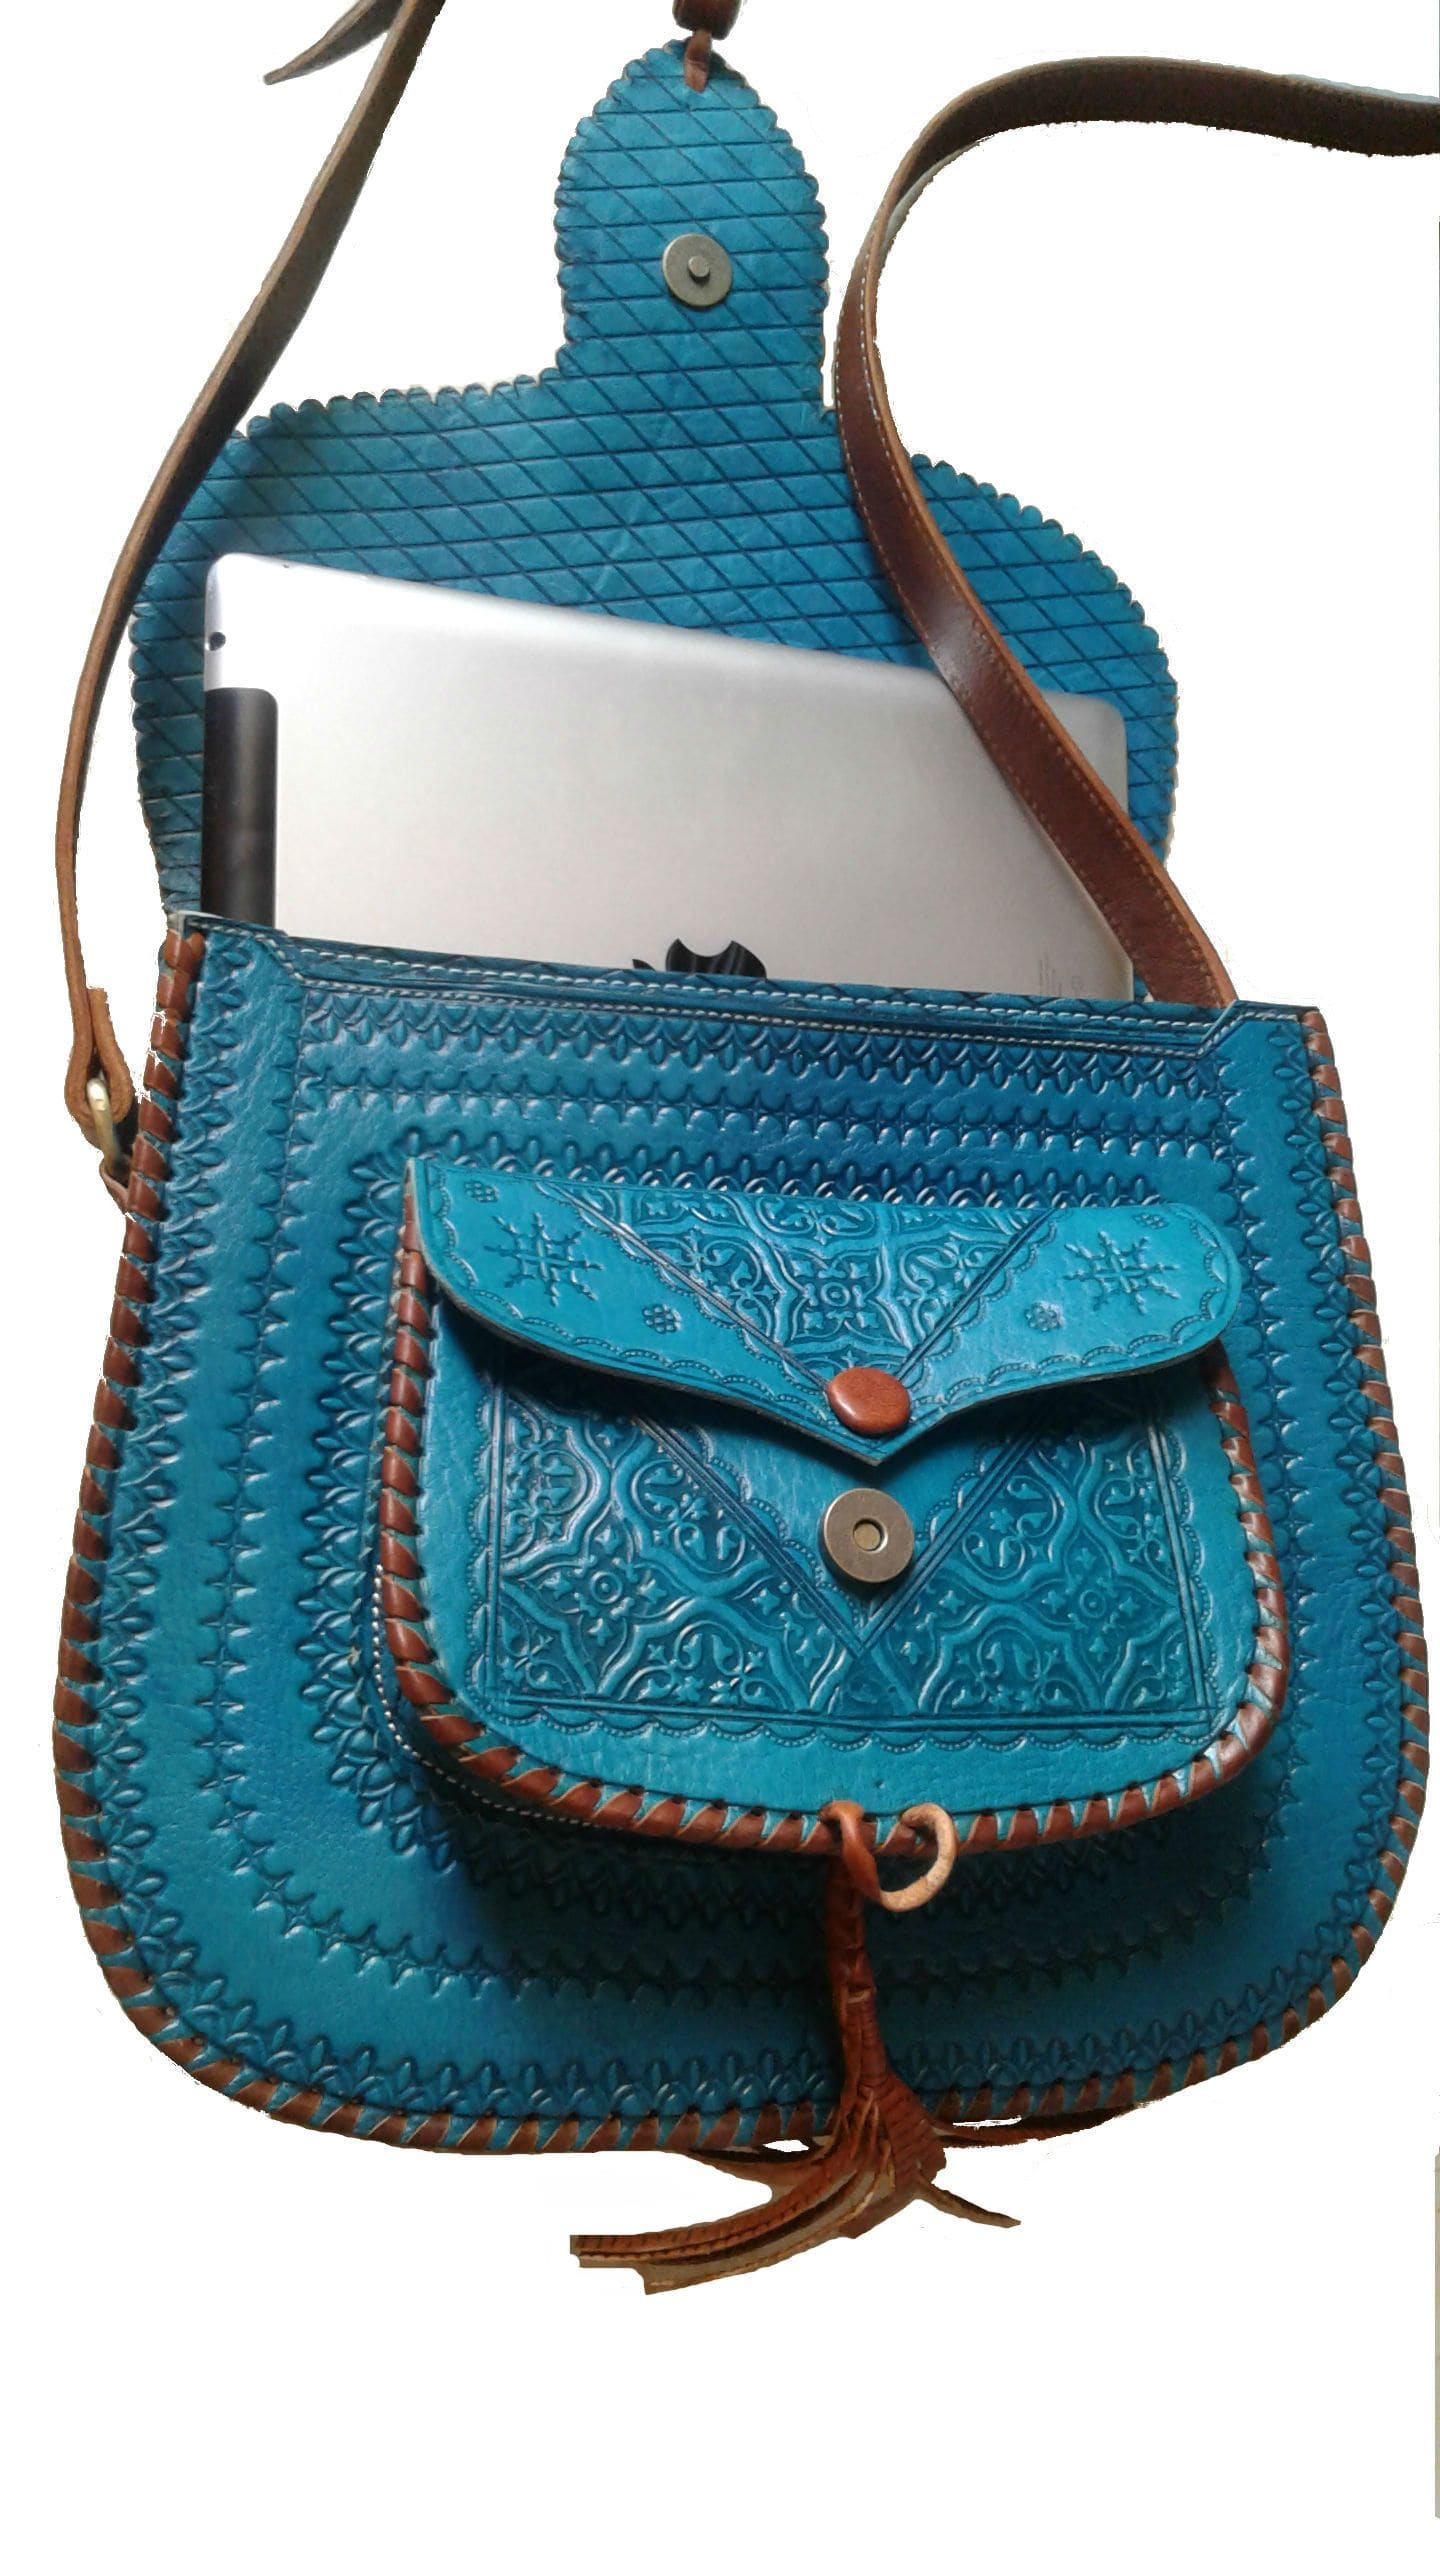 Crossbody Bag Shoulder Strap in Turquoise Camo | Groovy's | Bag Strap